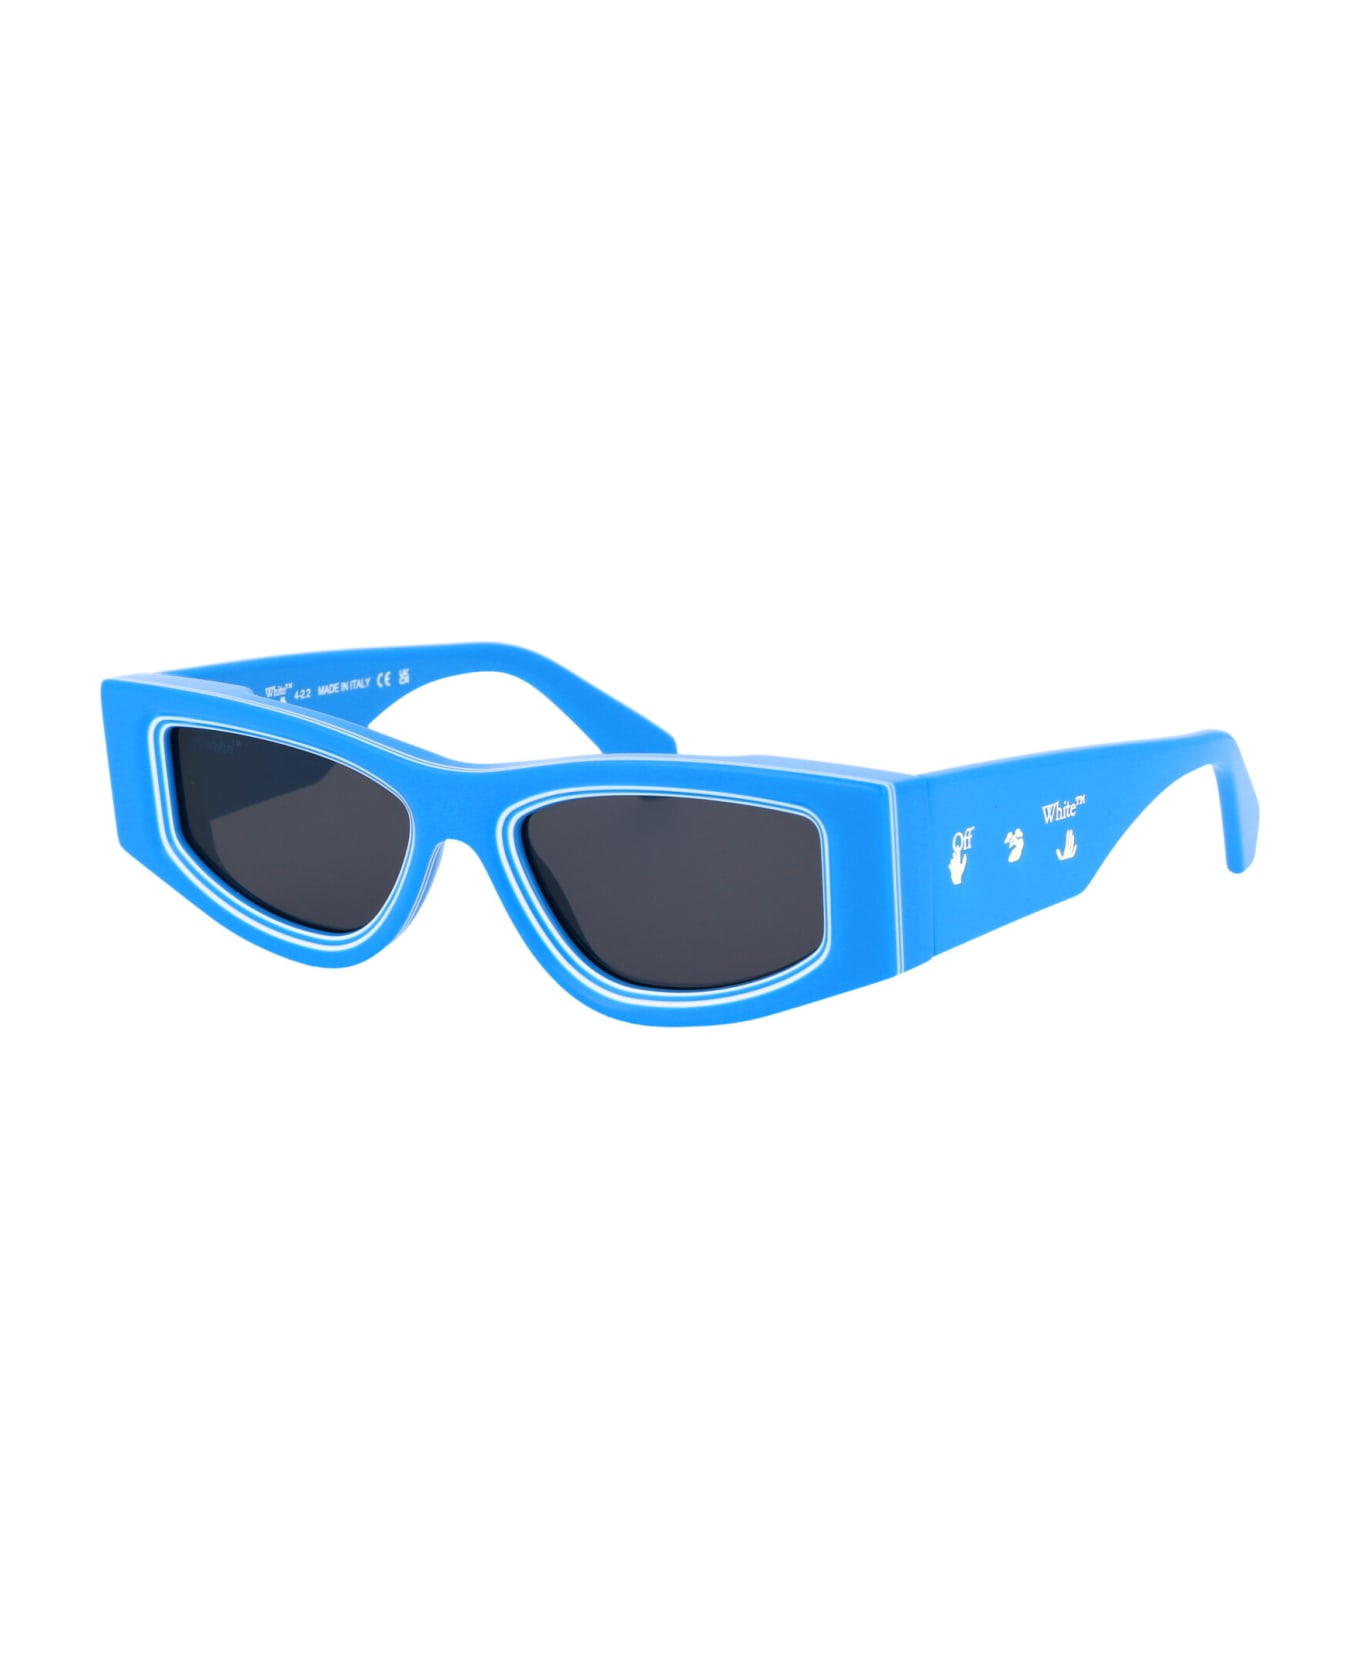 Off-White Andy Sunglasses - 4507 BLUE